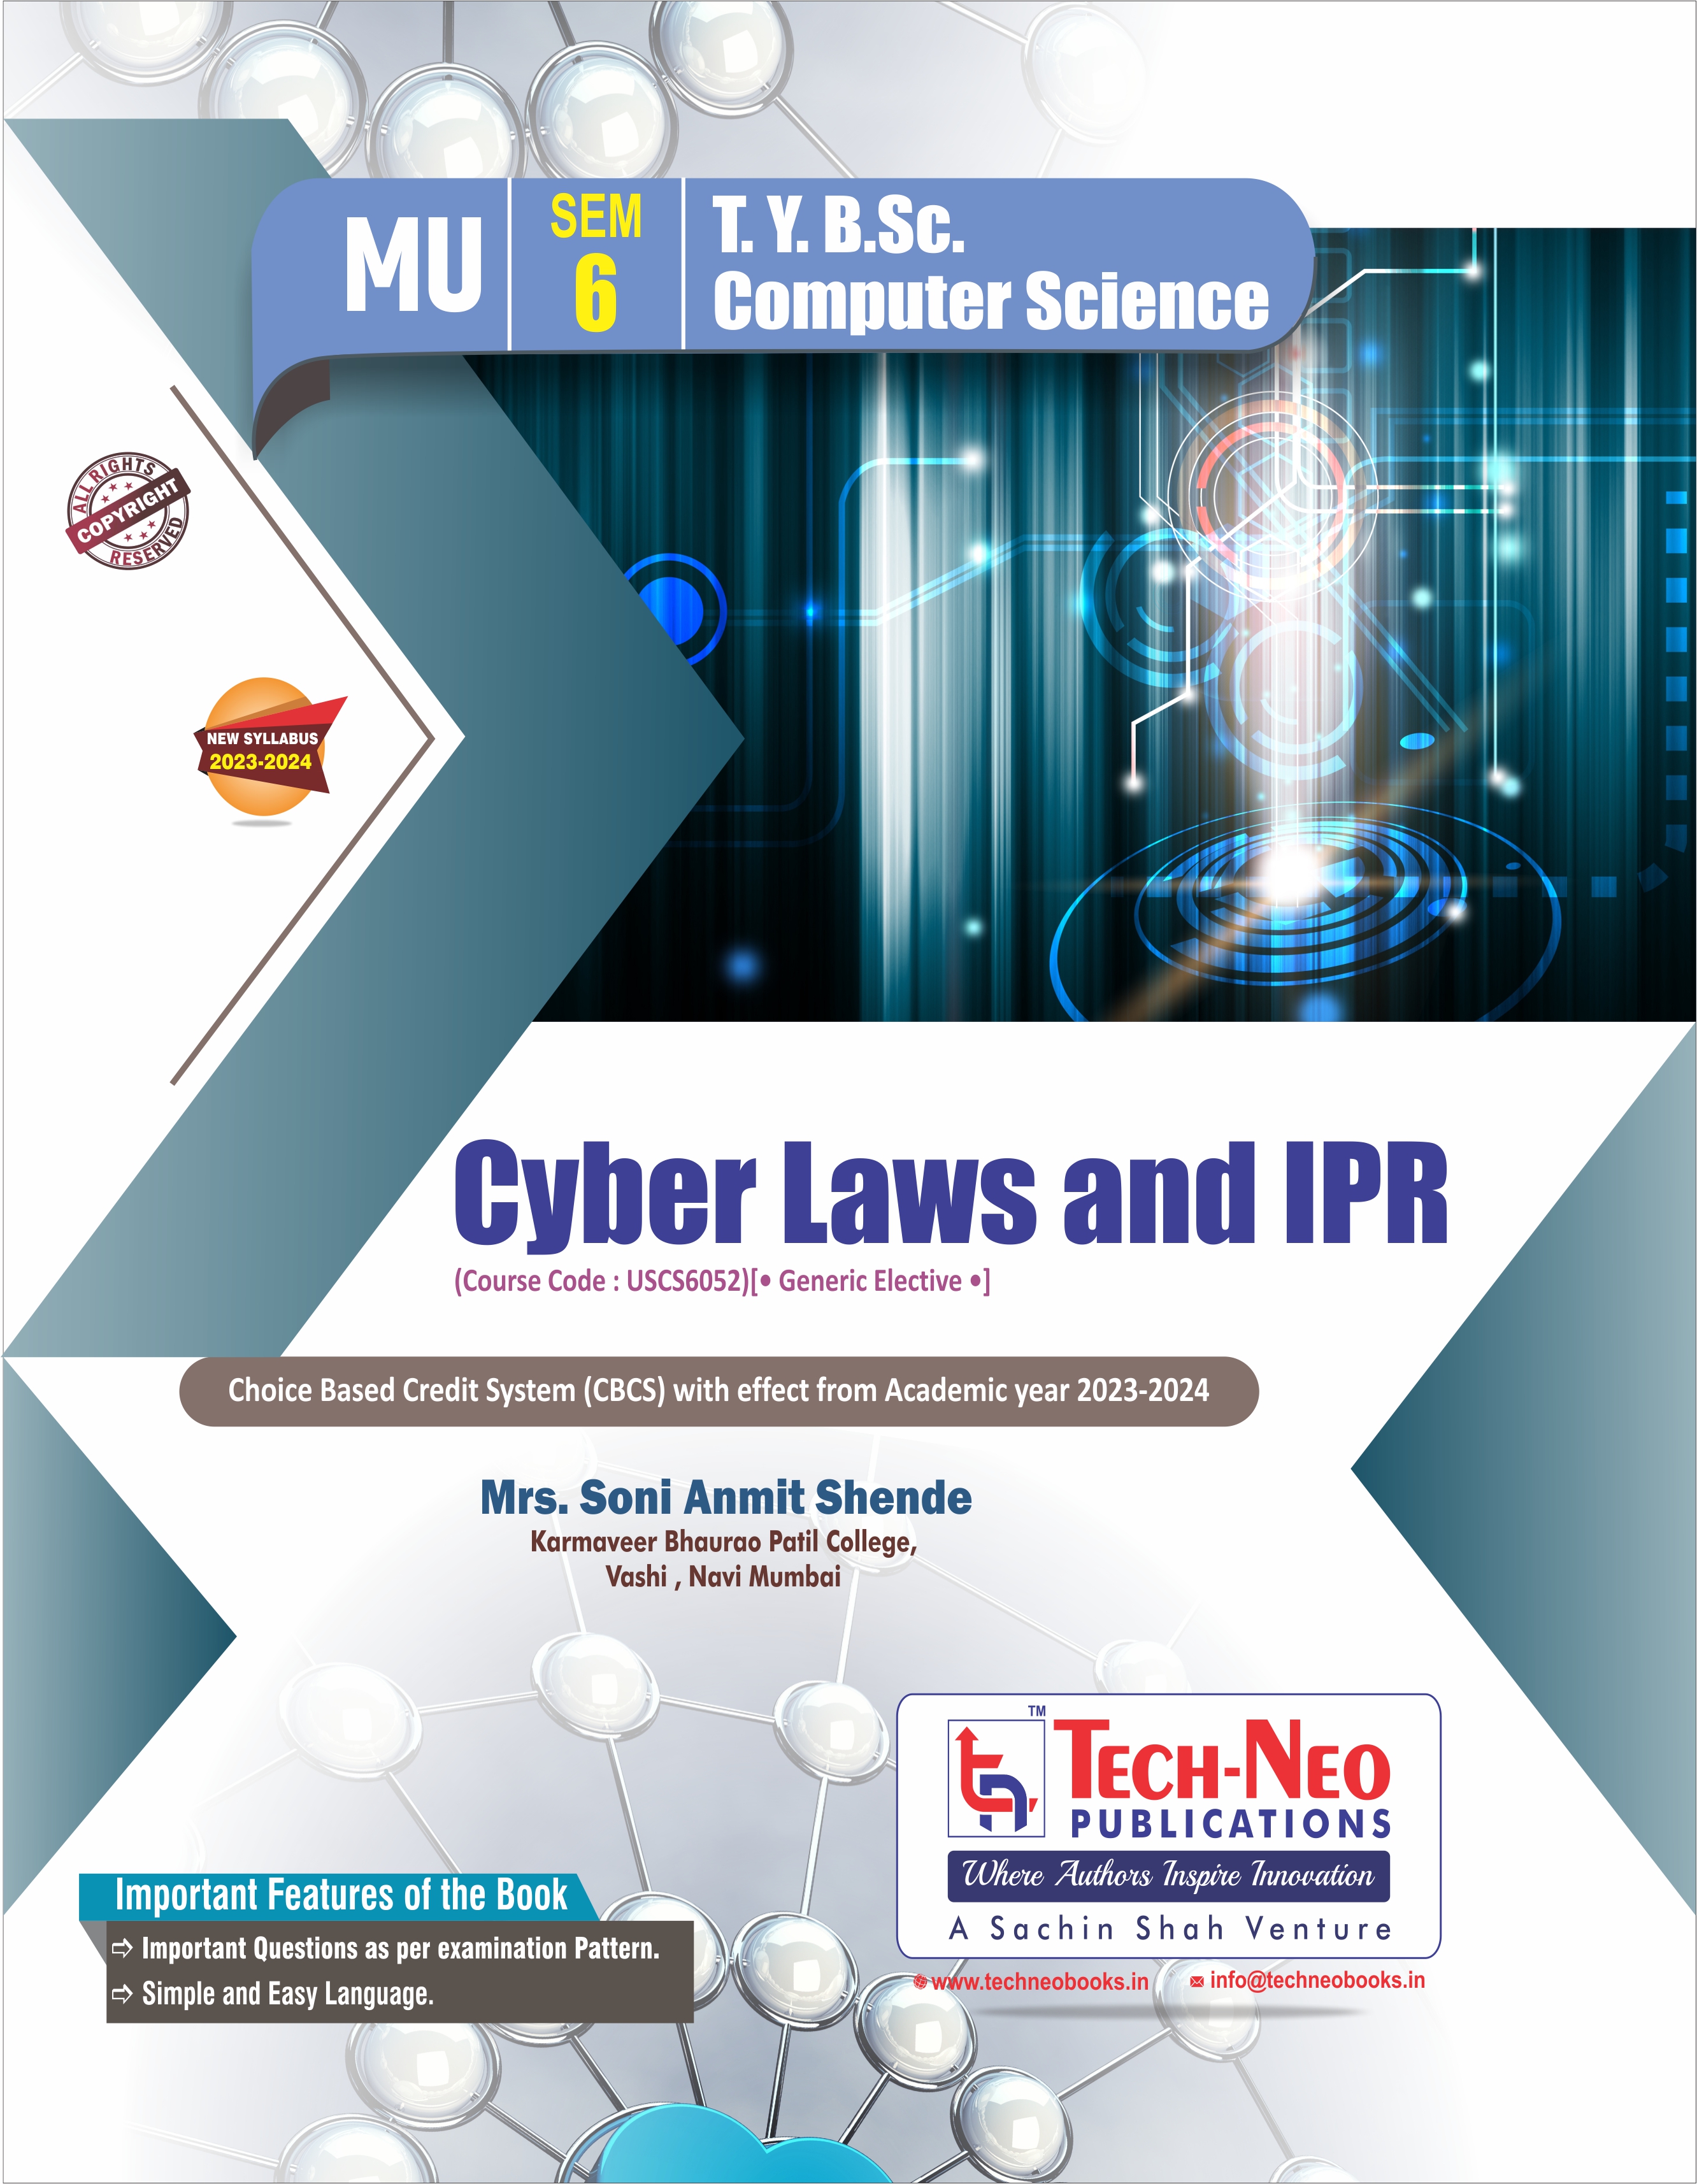 Cyber Laws and IPR